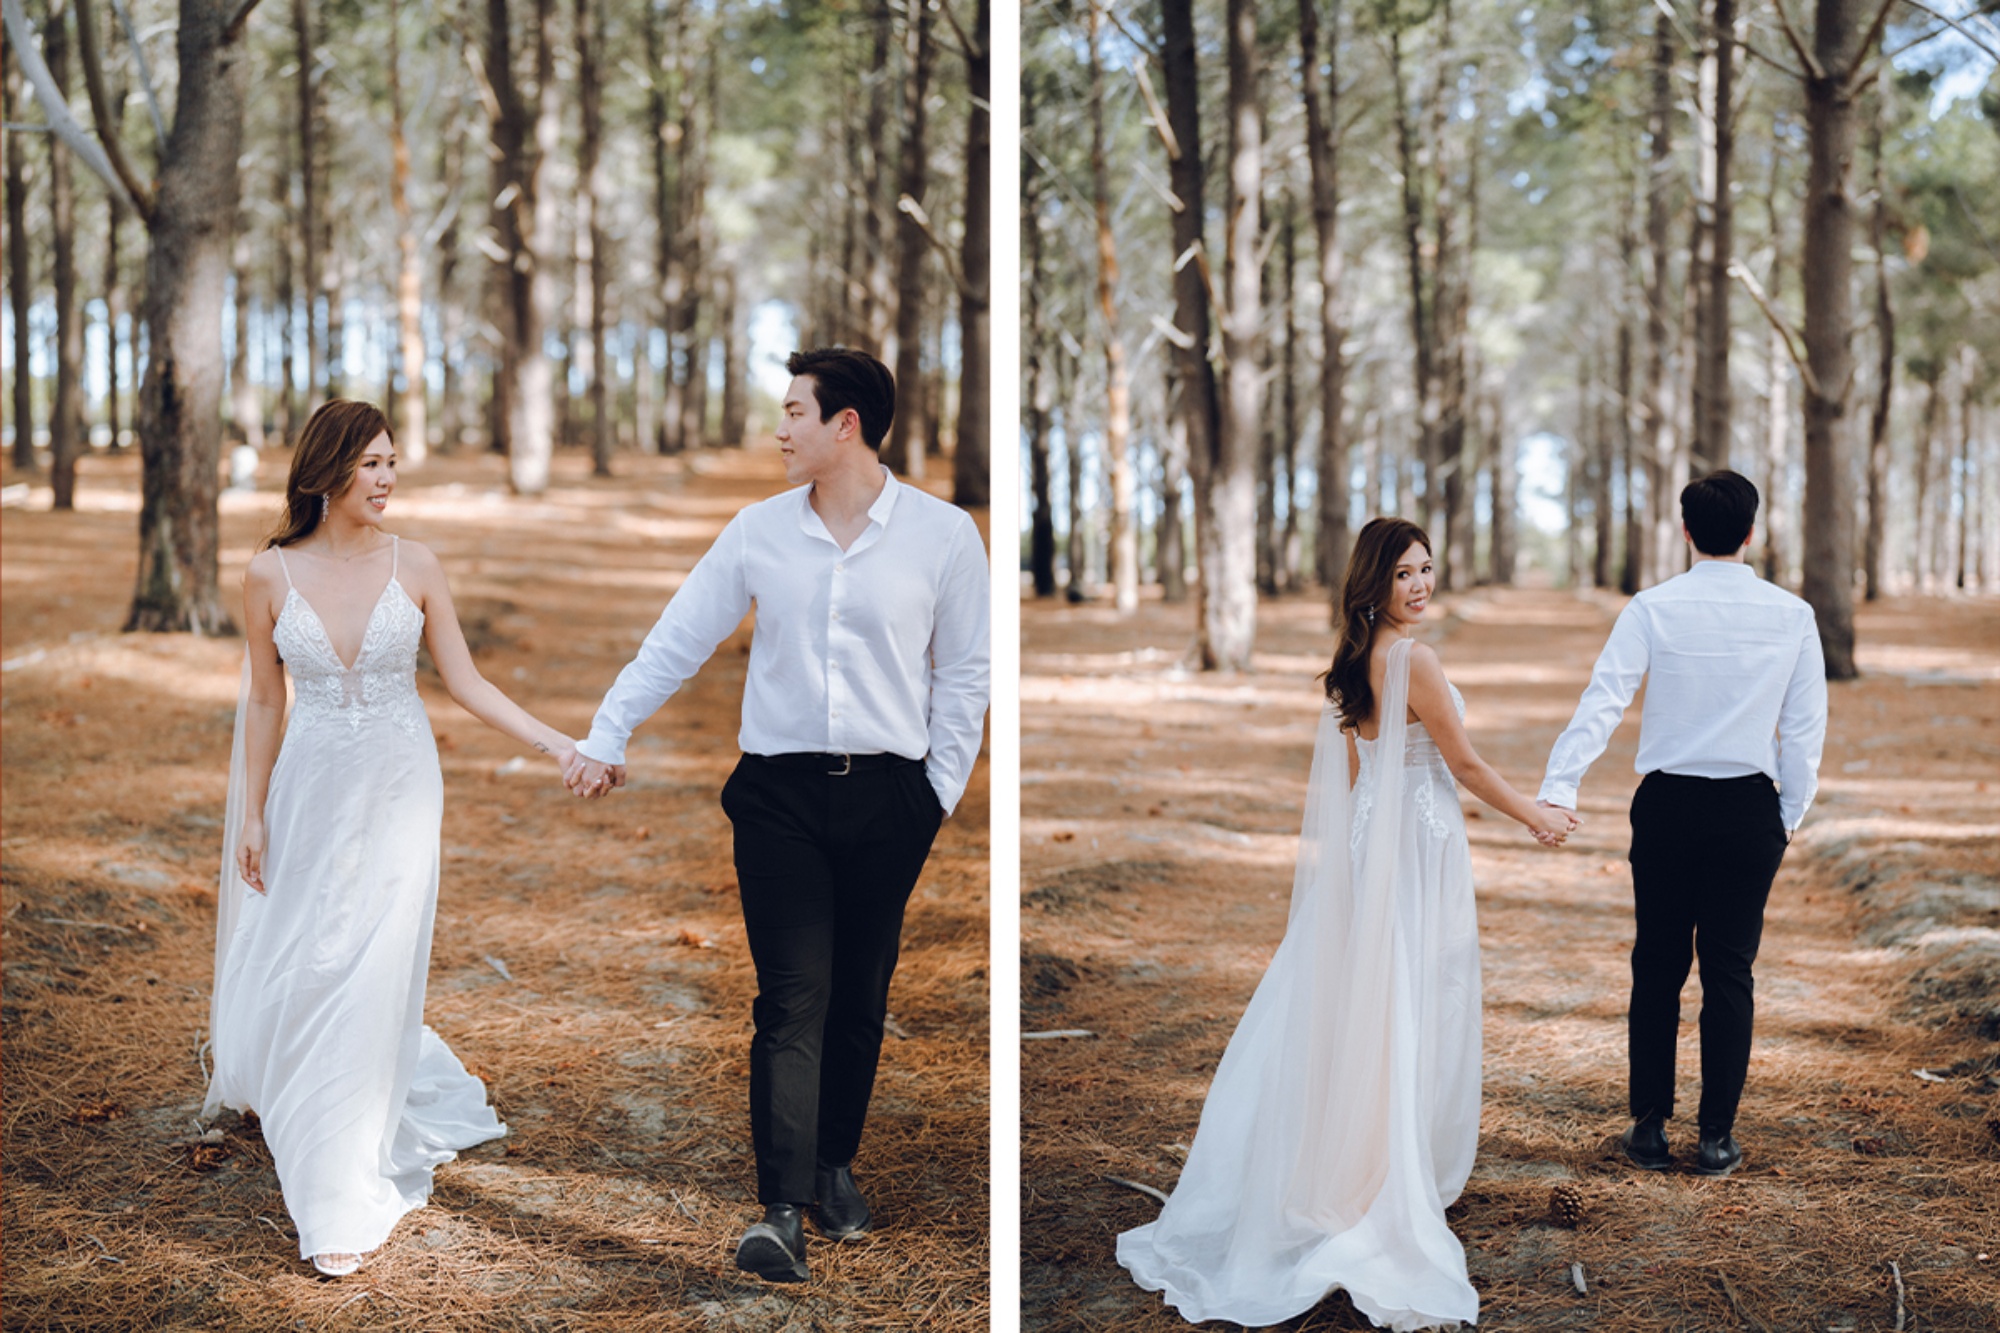 Capturing Forever in Perth: Jasmine & Kamui's Pre-Wedding Story by Jimmy on OneThreeOneFour 0